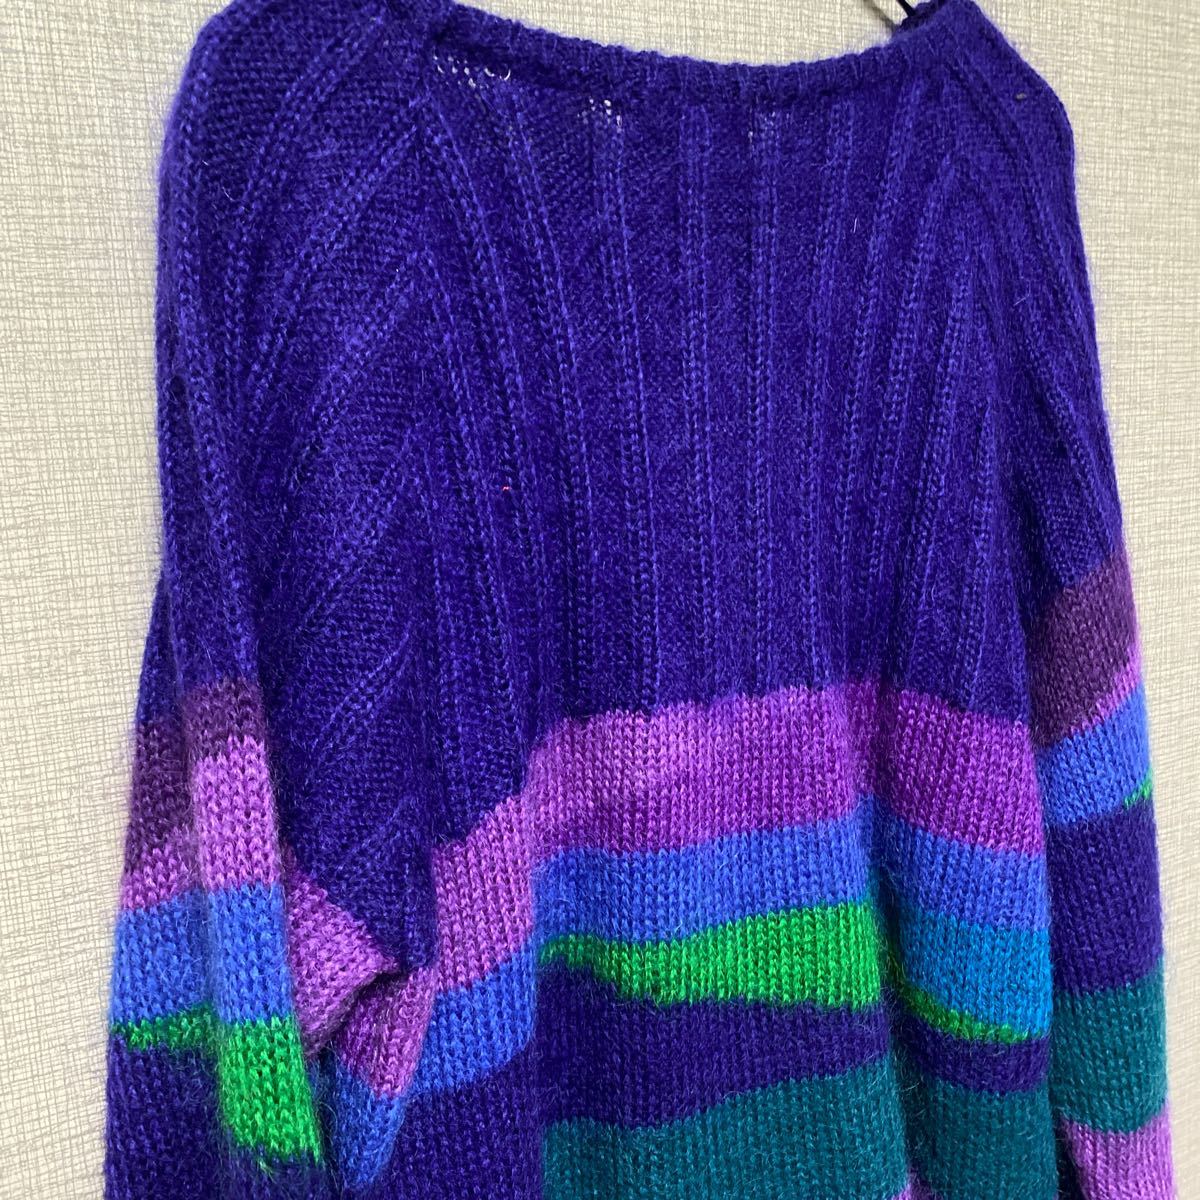 80s 90smo hair mohair wool knitted sweater USA Vintage Vintage America old clothes design multicolor border length of hair length .